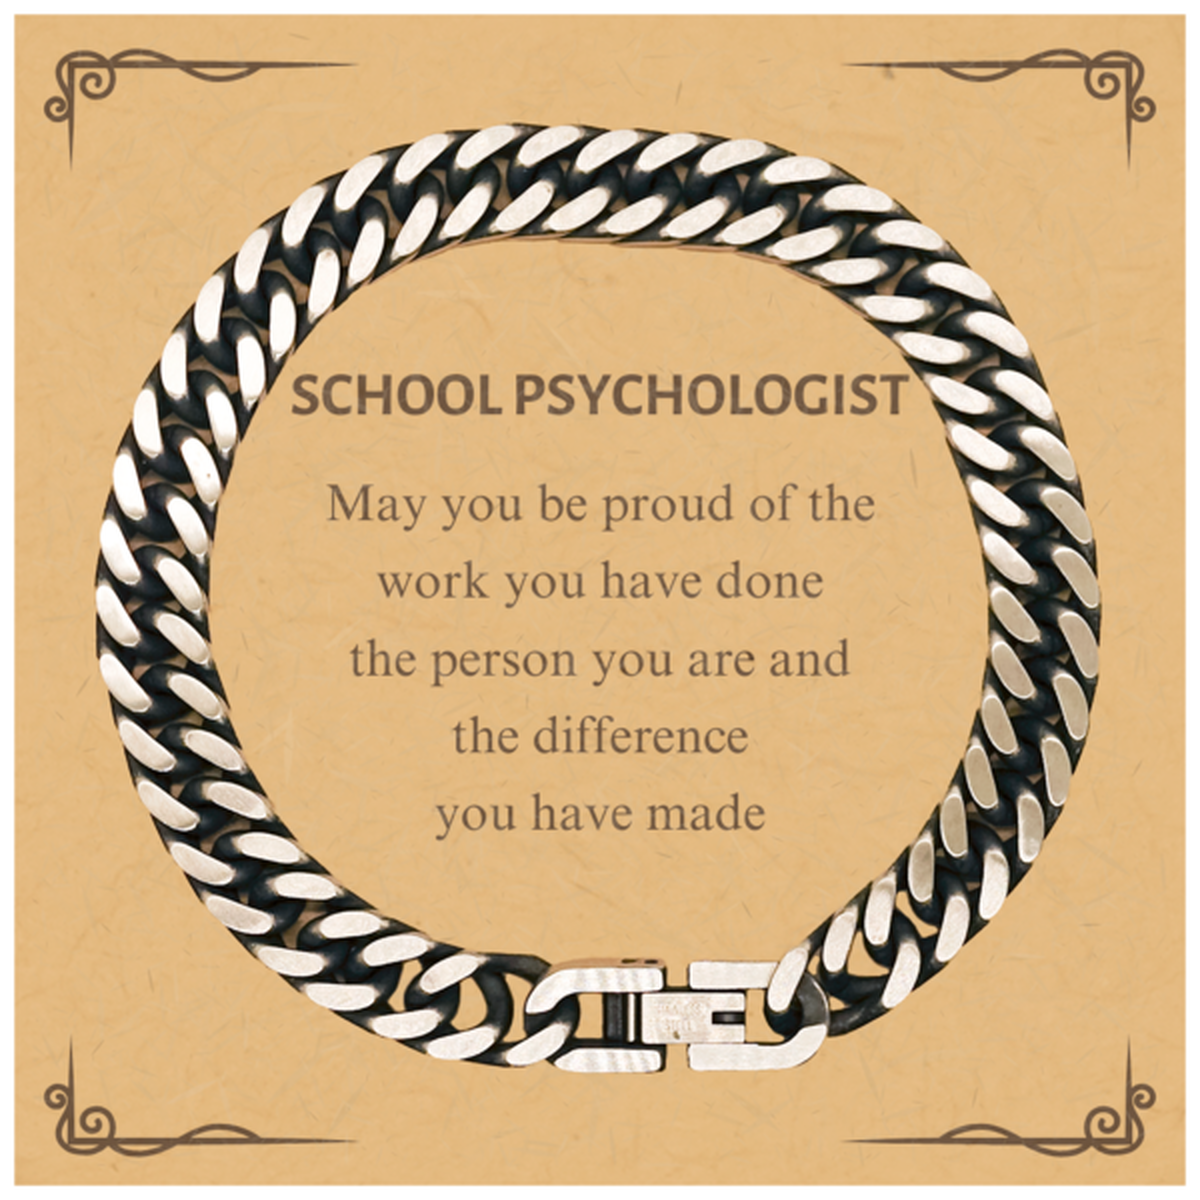 School Psychologist May you be proud of the work you have done, Retirement School Psychologist Cuban Link Chain Bracelet for Colleague Appreciation Gifts Amazing for School Psychologist